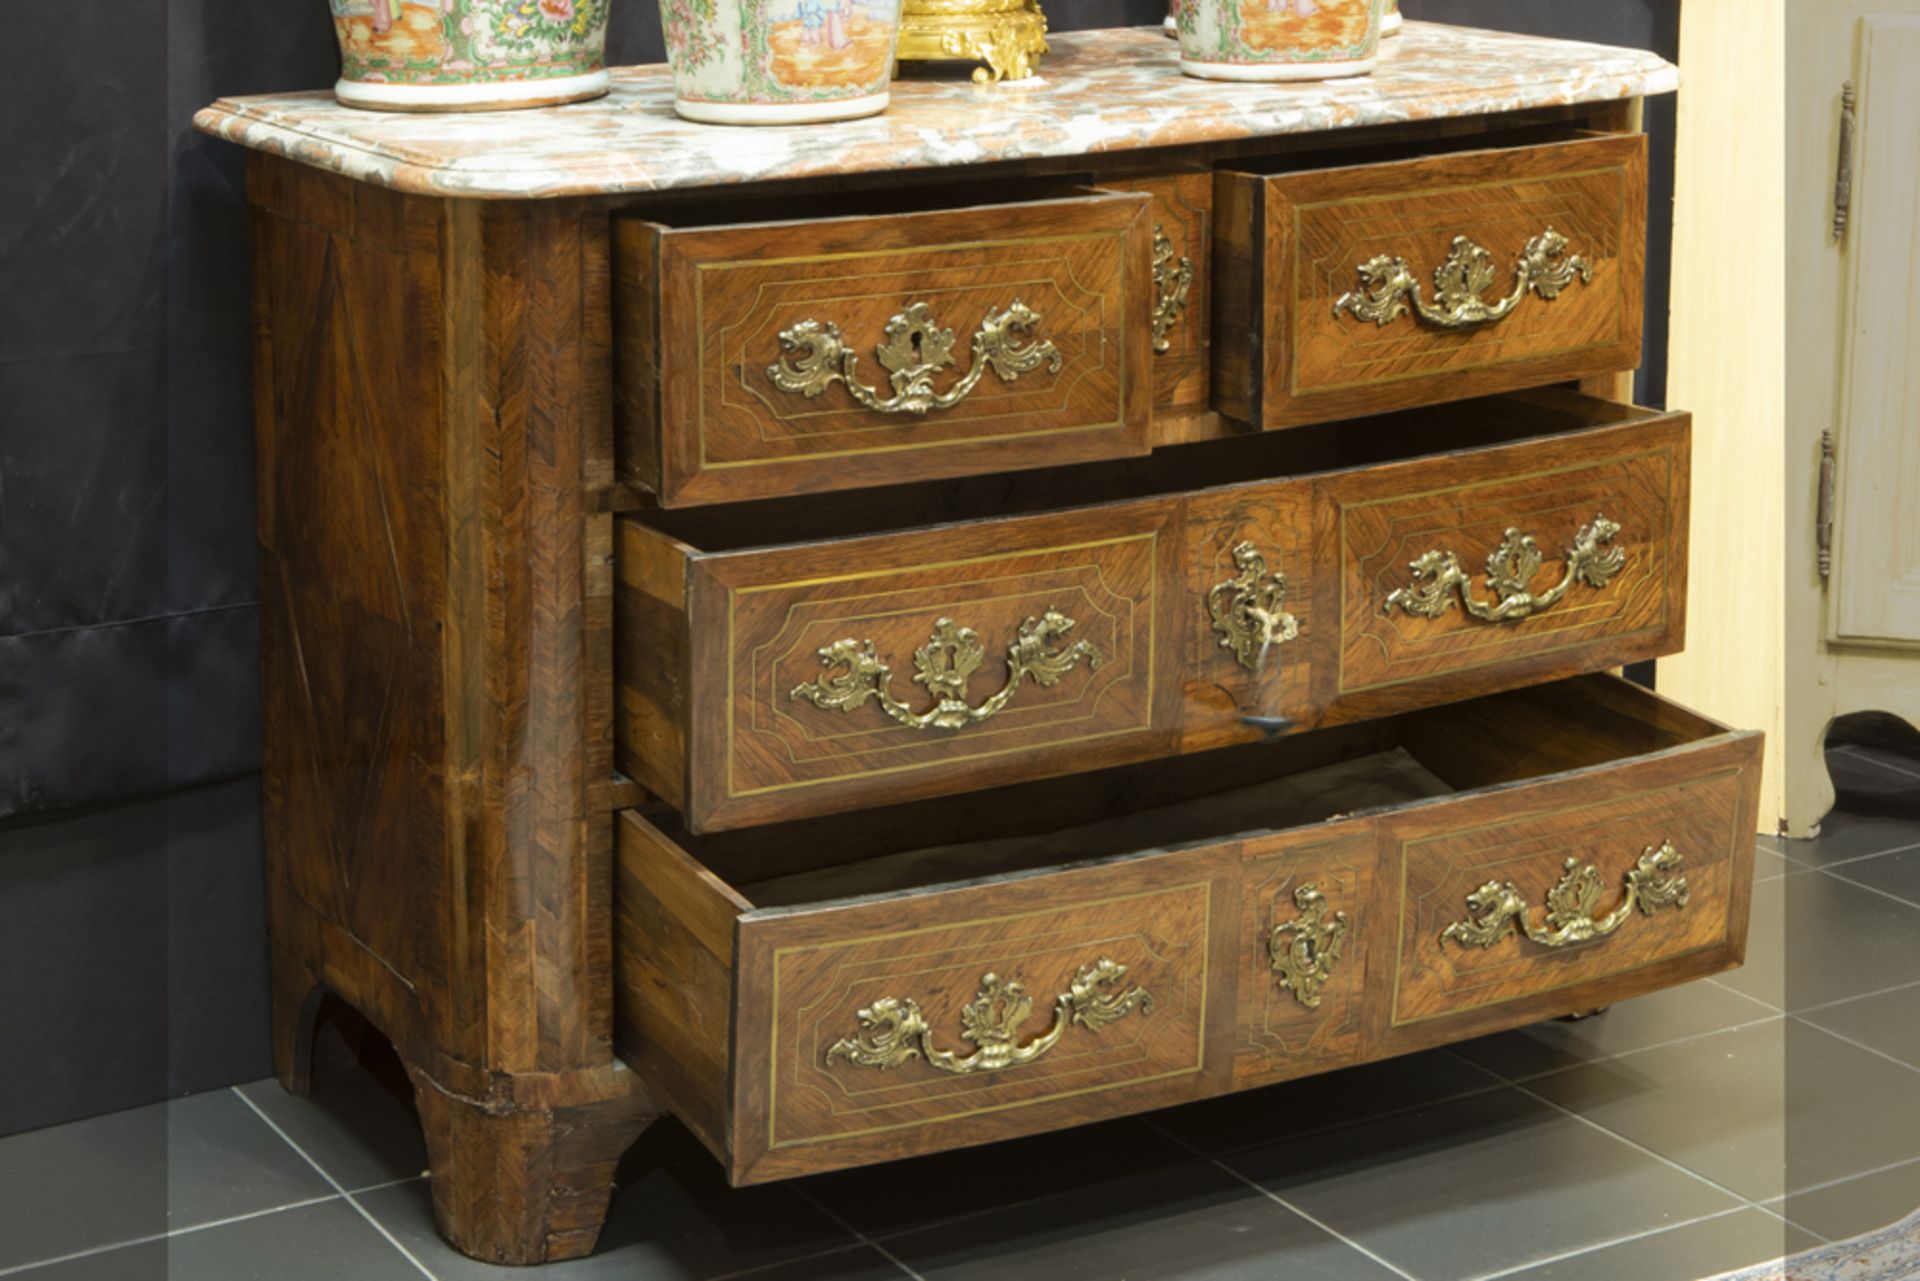 18th Cent. chest of drawers in parquetry with brass inlay, with four drawers with original mountings - Image 2 of 5